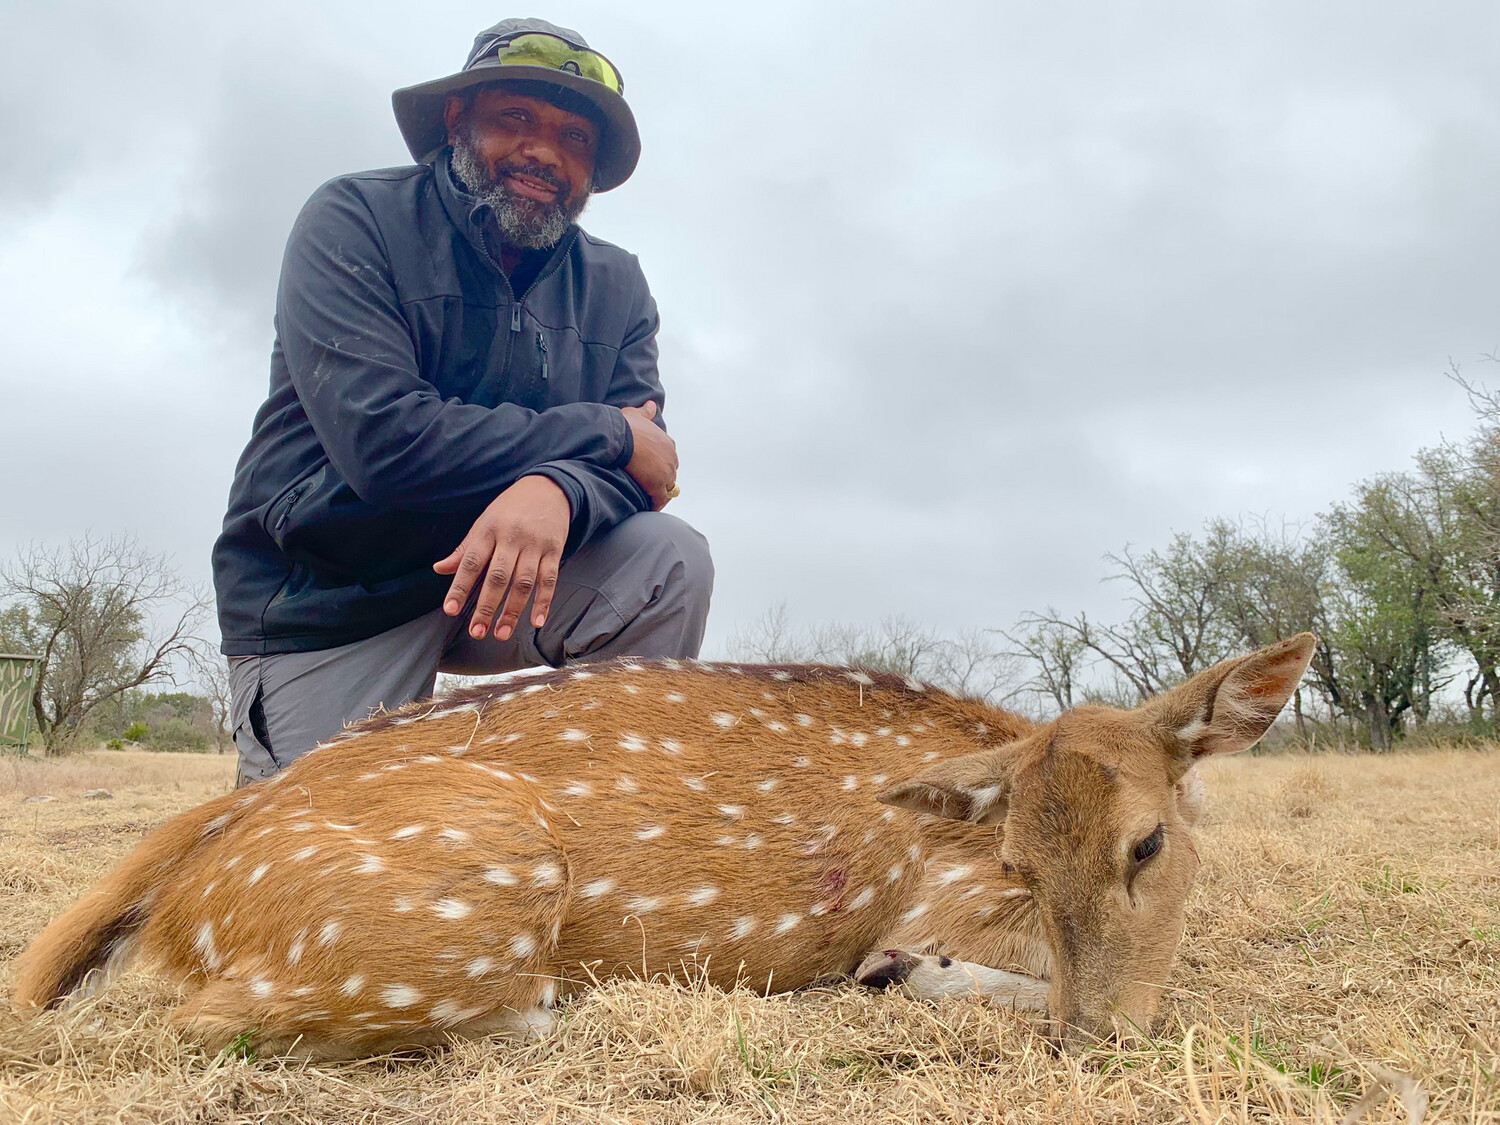 Affordable, Family Friendly - Axis Meat Hunt in the Texas Hill Country - 2 day 2 night all inclusive For Only $750 Per Person. (2 Hunter Minimum) Limited Openings Now Booking  For July and August